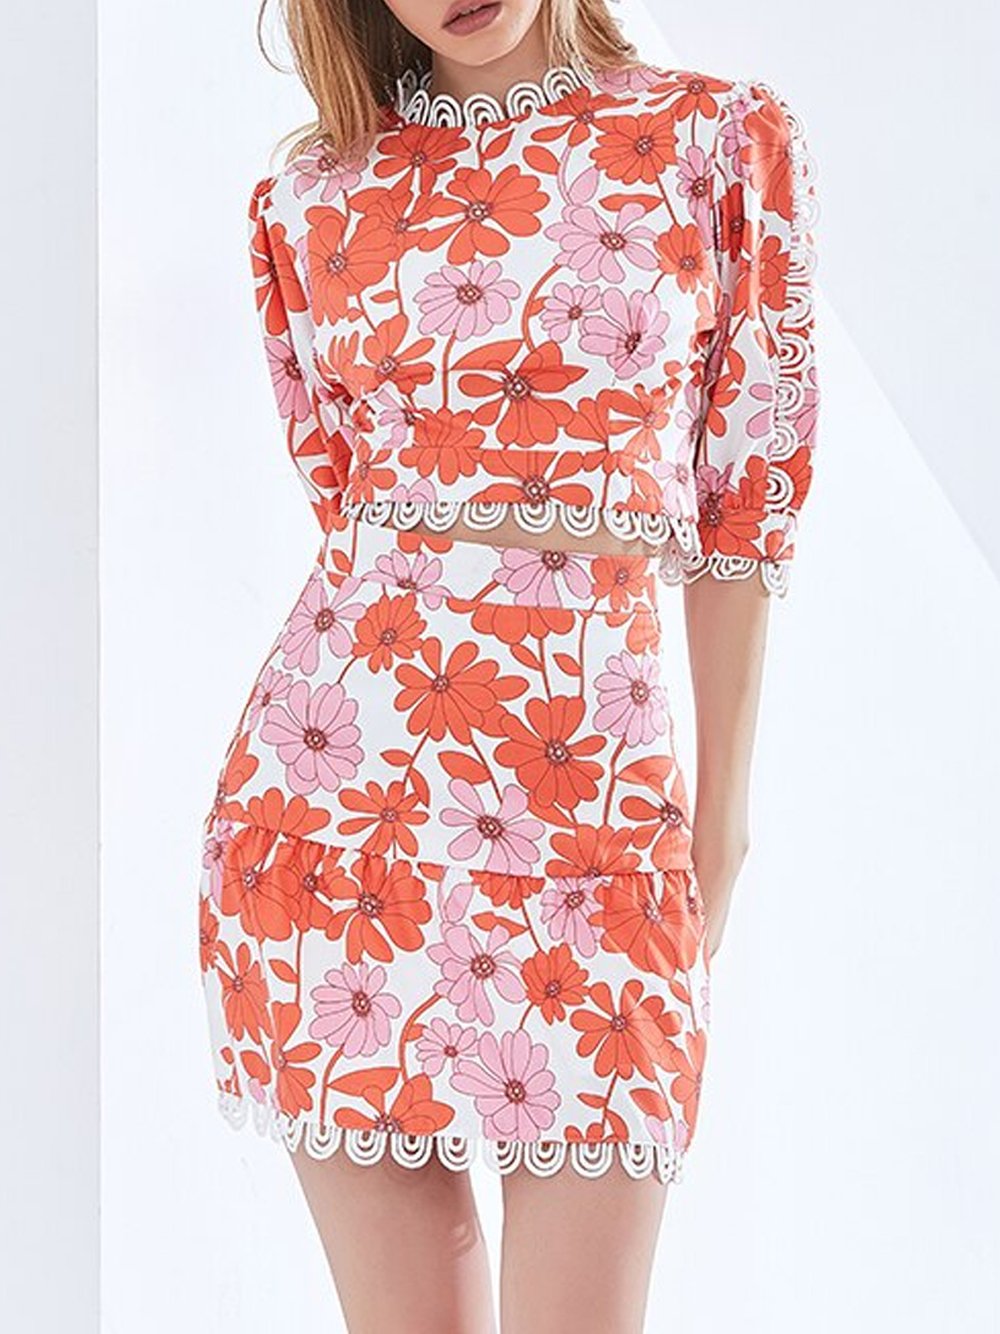 RILEY Floral Top & Skirt Set in Red/Pink